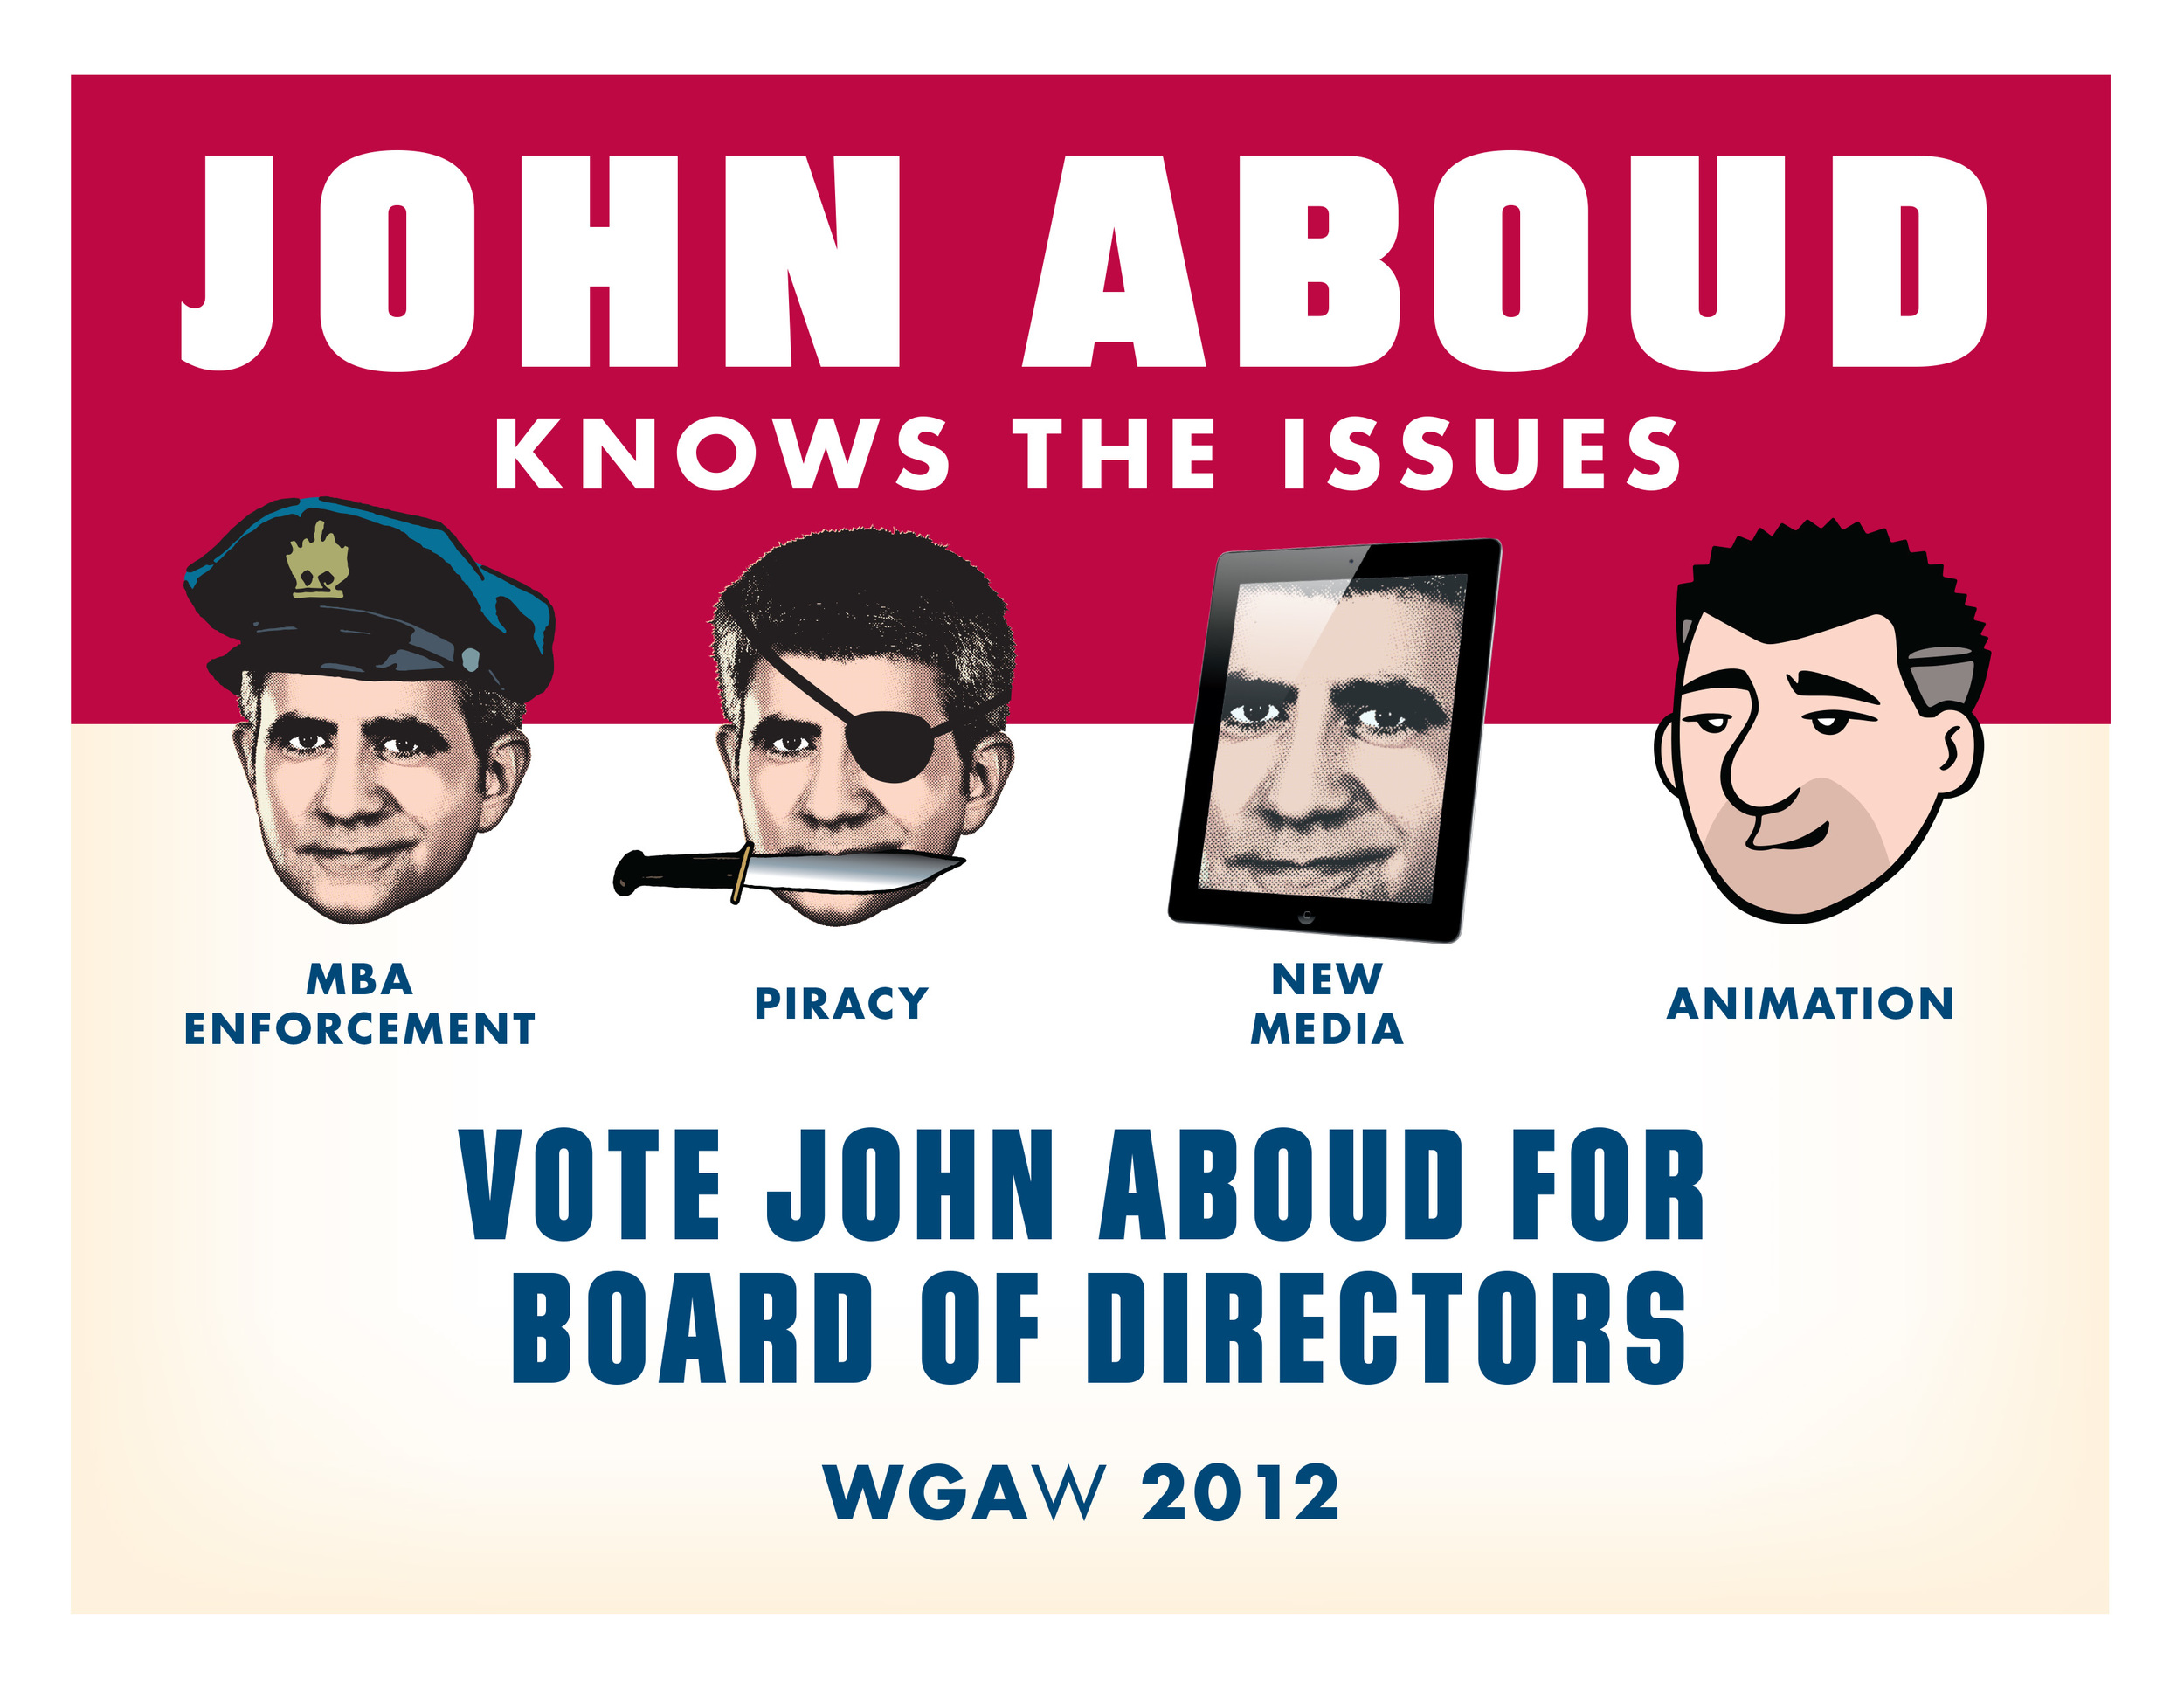 John Aboud campaign poster